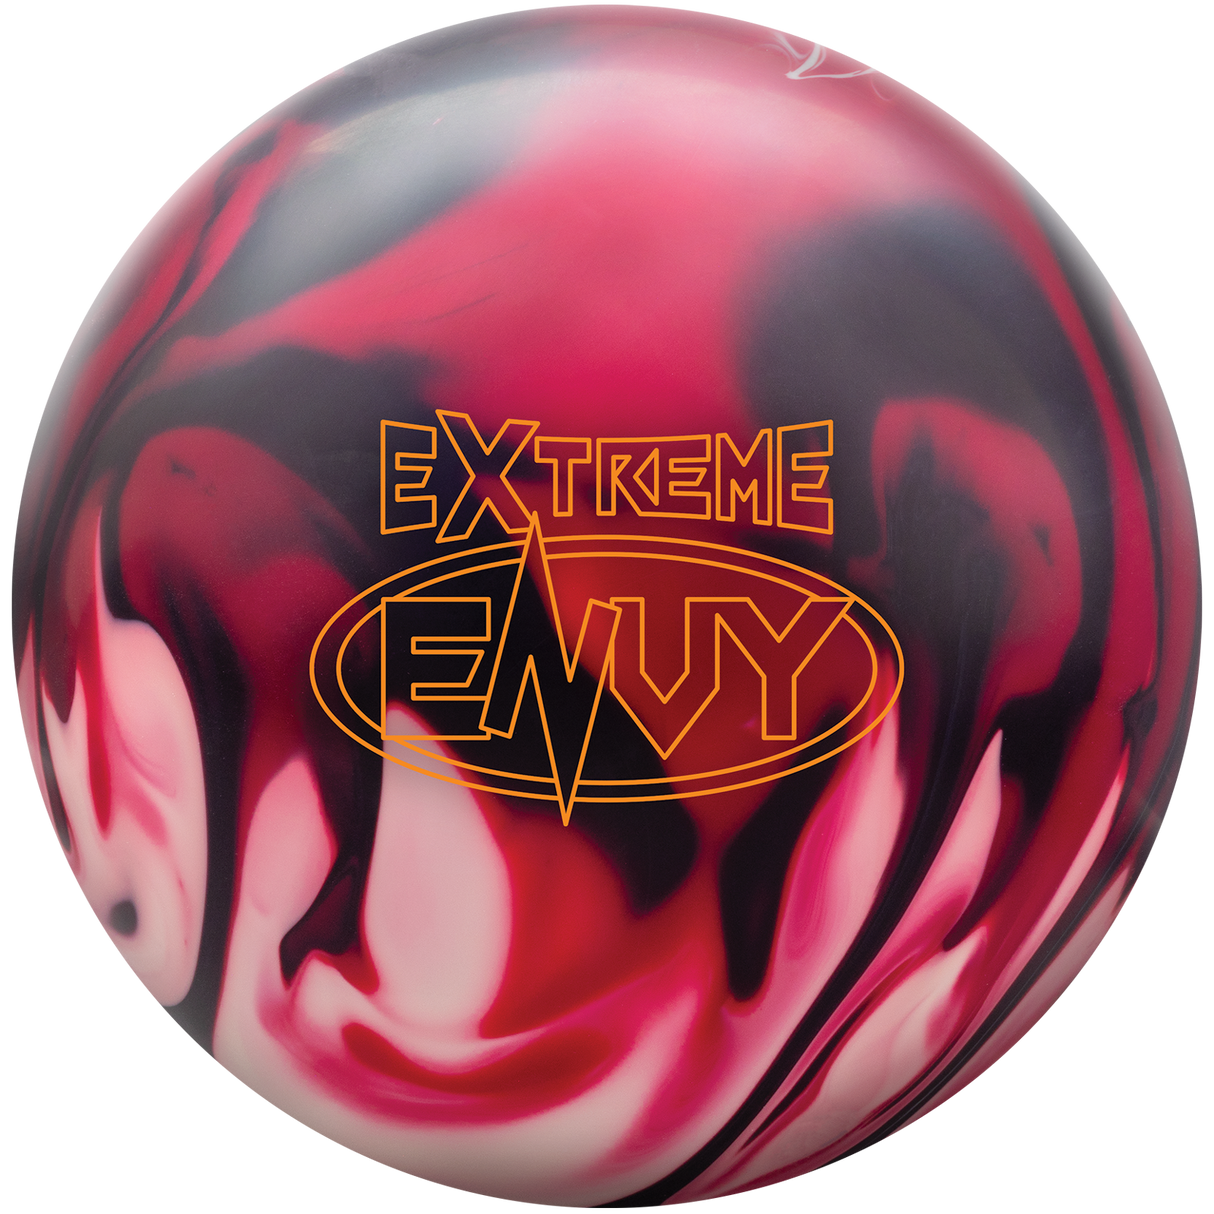 hammer-extreme-envy-bowling-ball. Inside Bowling powered by Ray Orf's Pro Shop in St. Louis, Missouri USA best prices online. Free shipping on orders over $75.